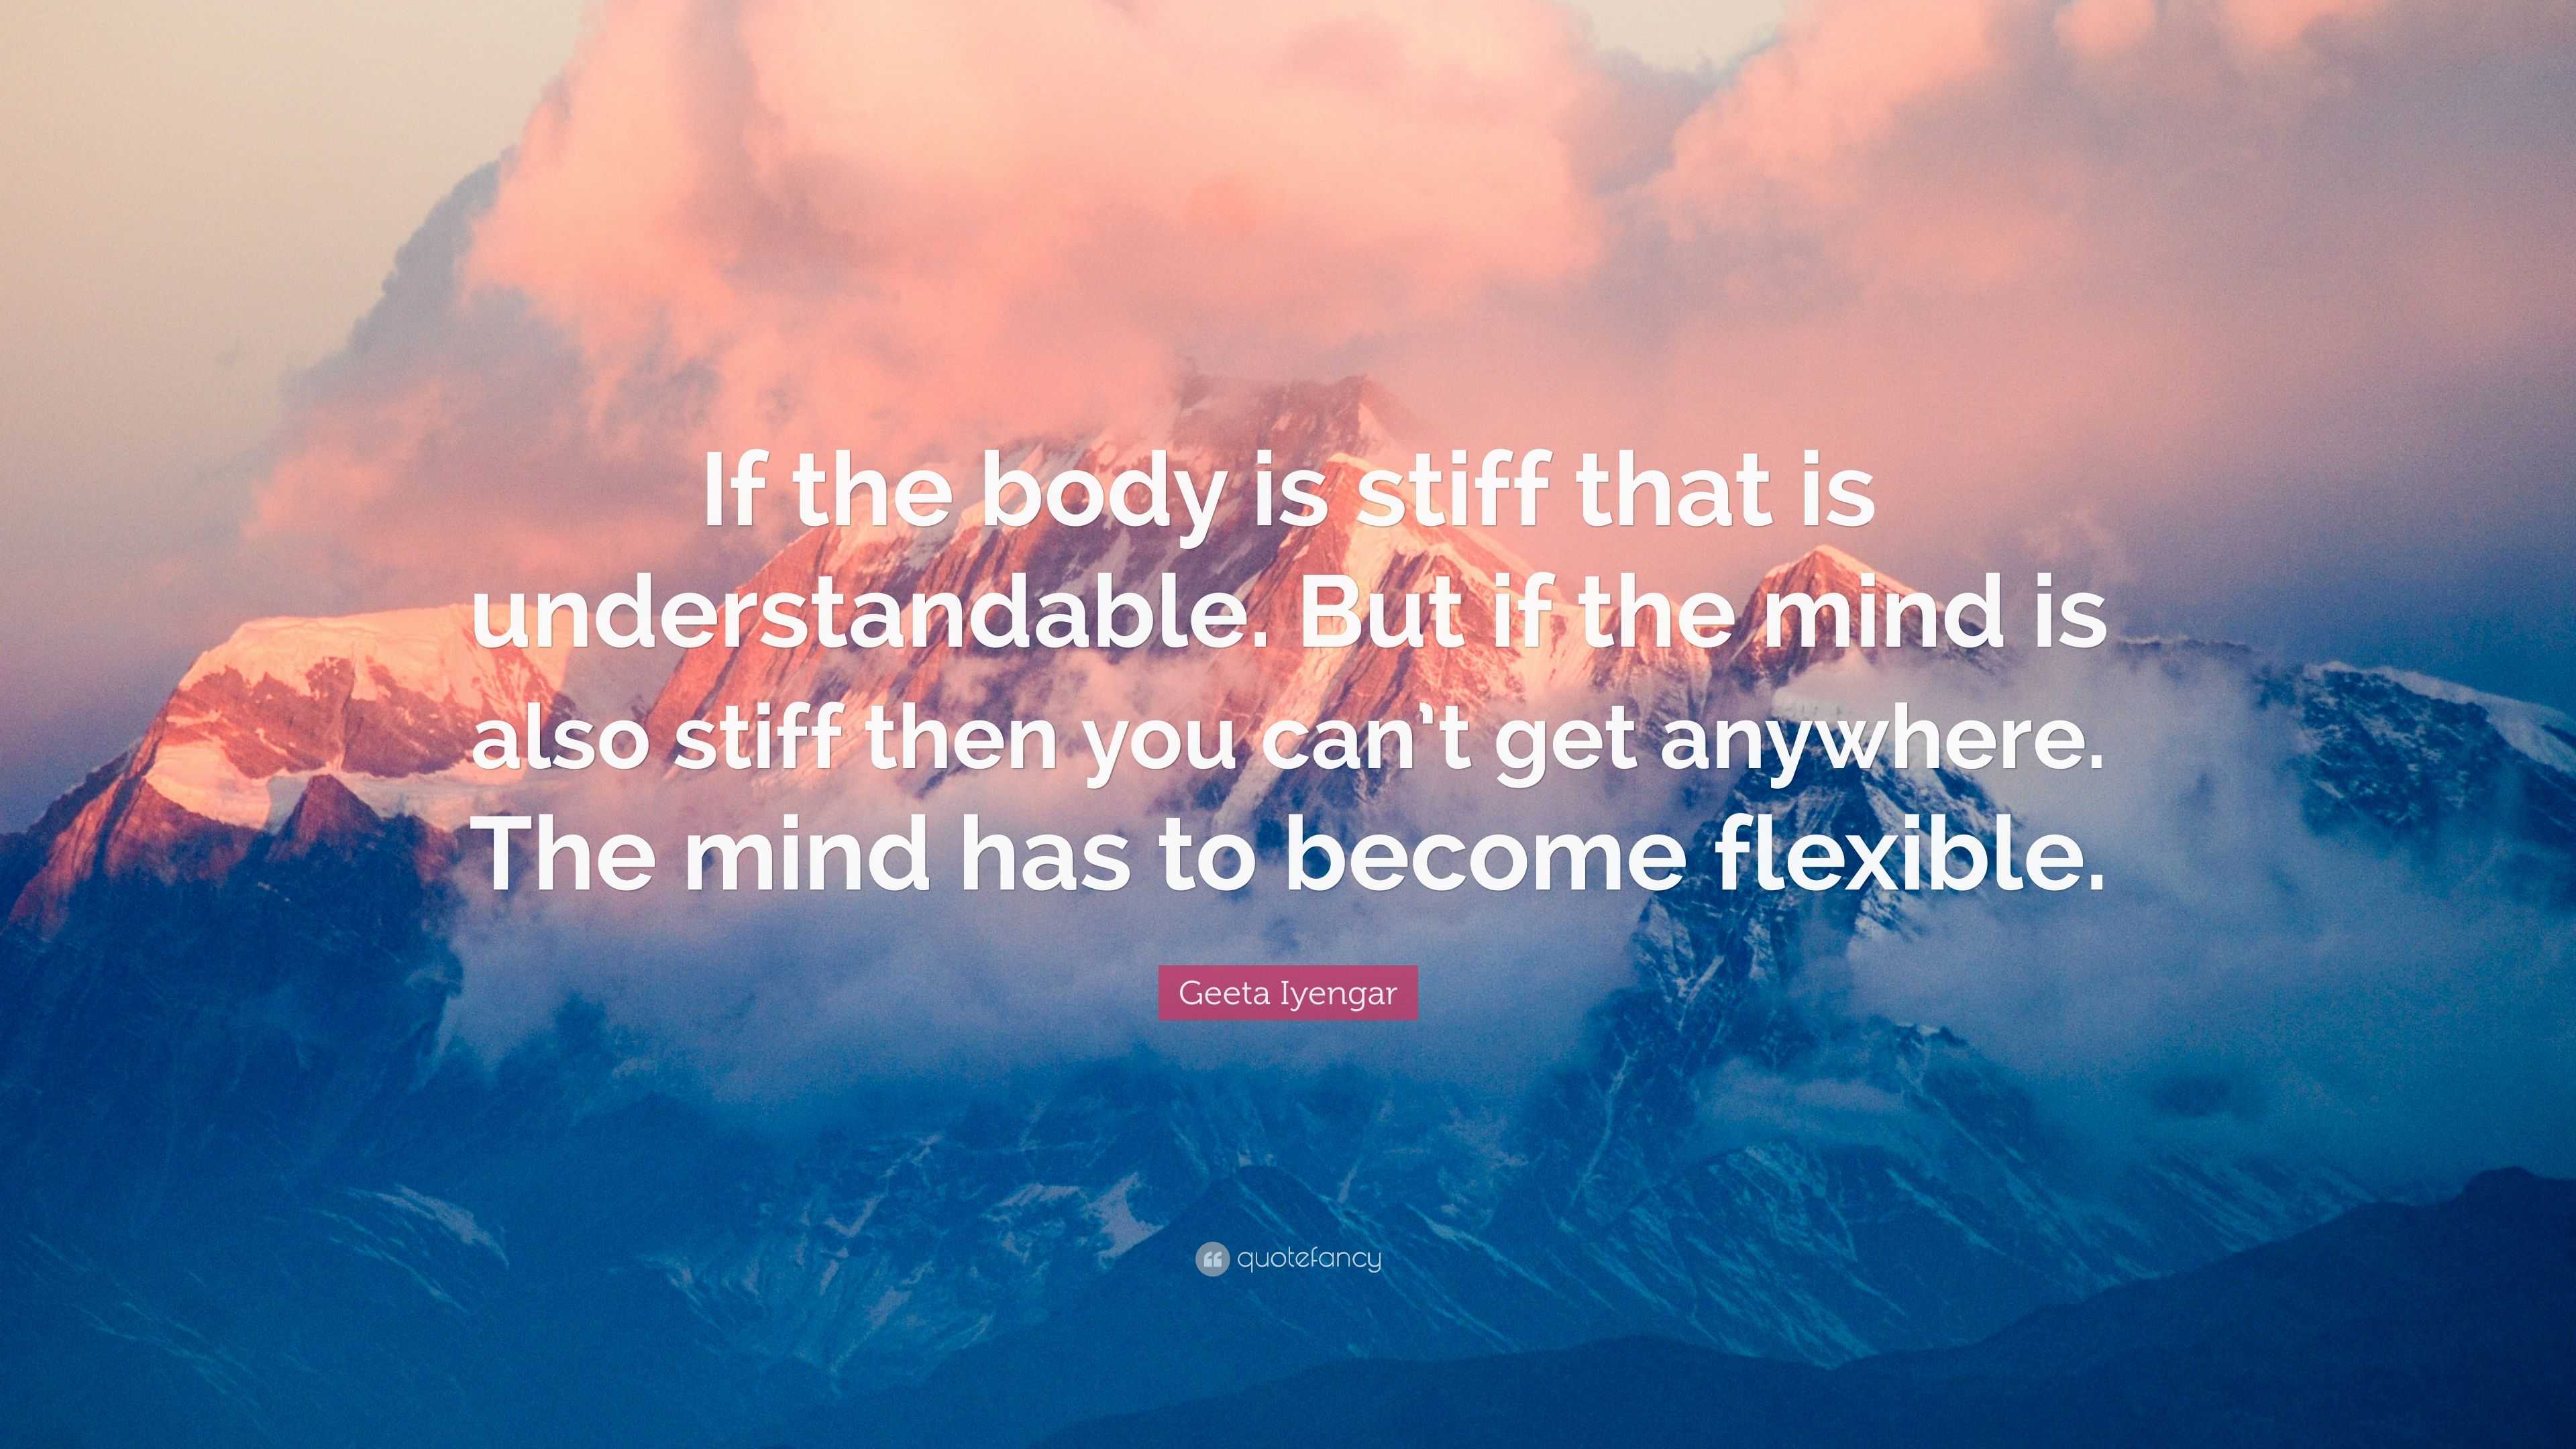 Geeta Iyengar Quote: “If the body is stiff that is understandable. But ...